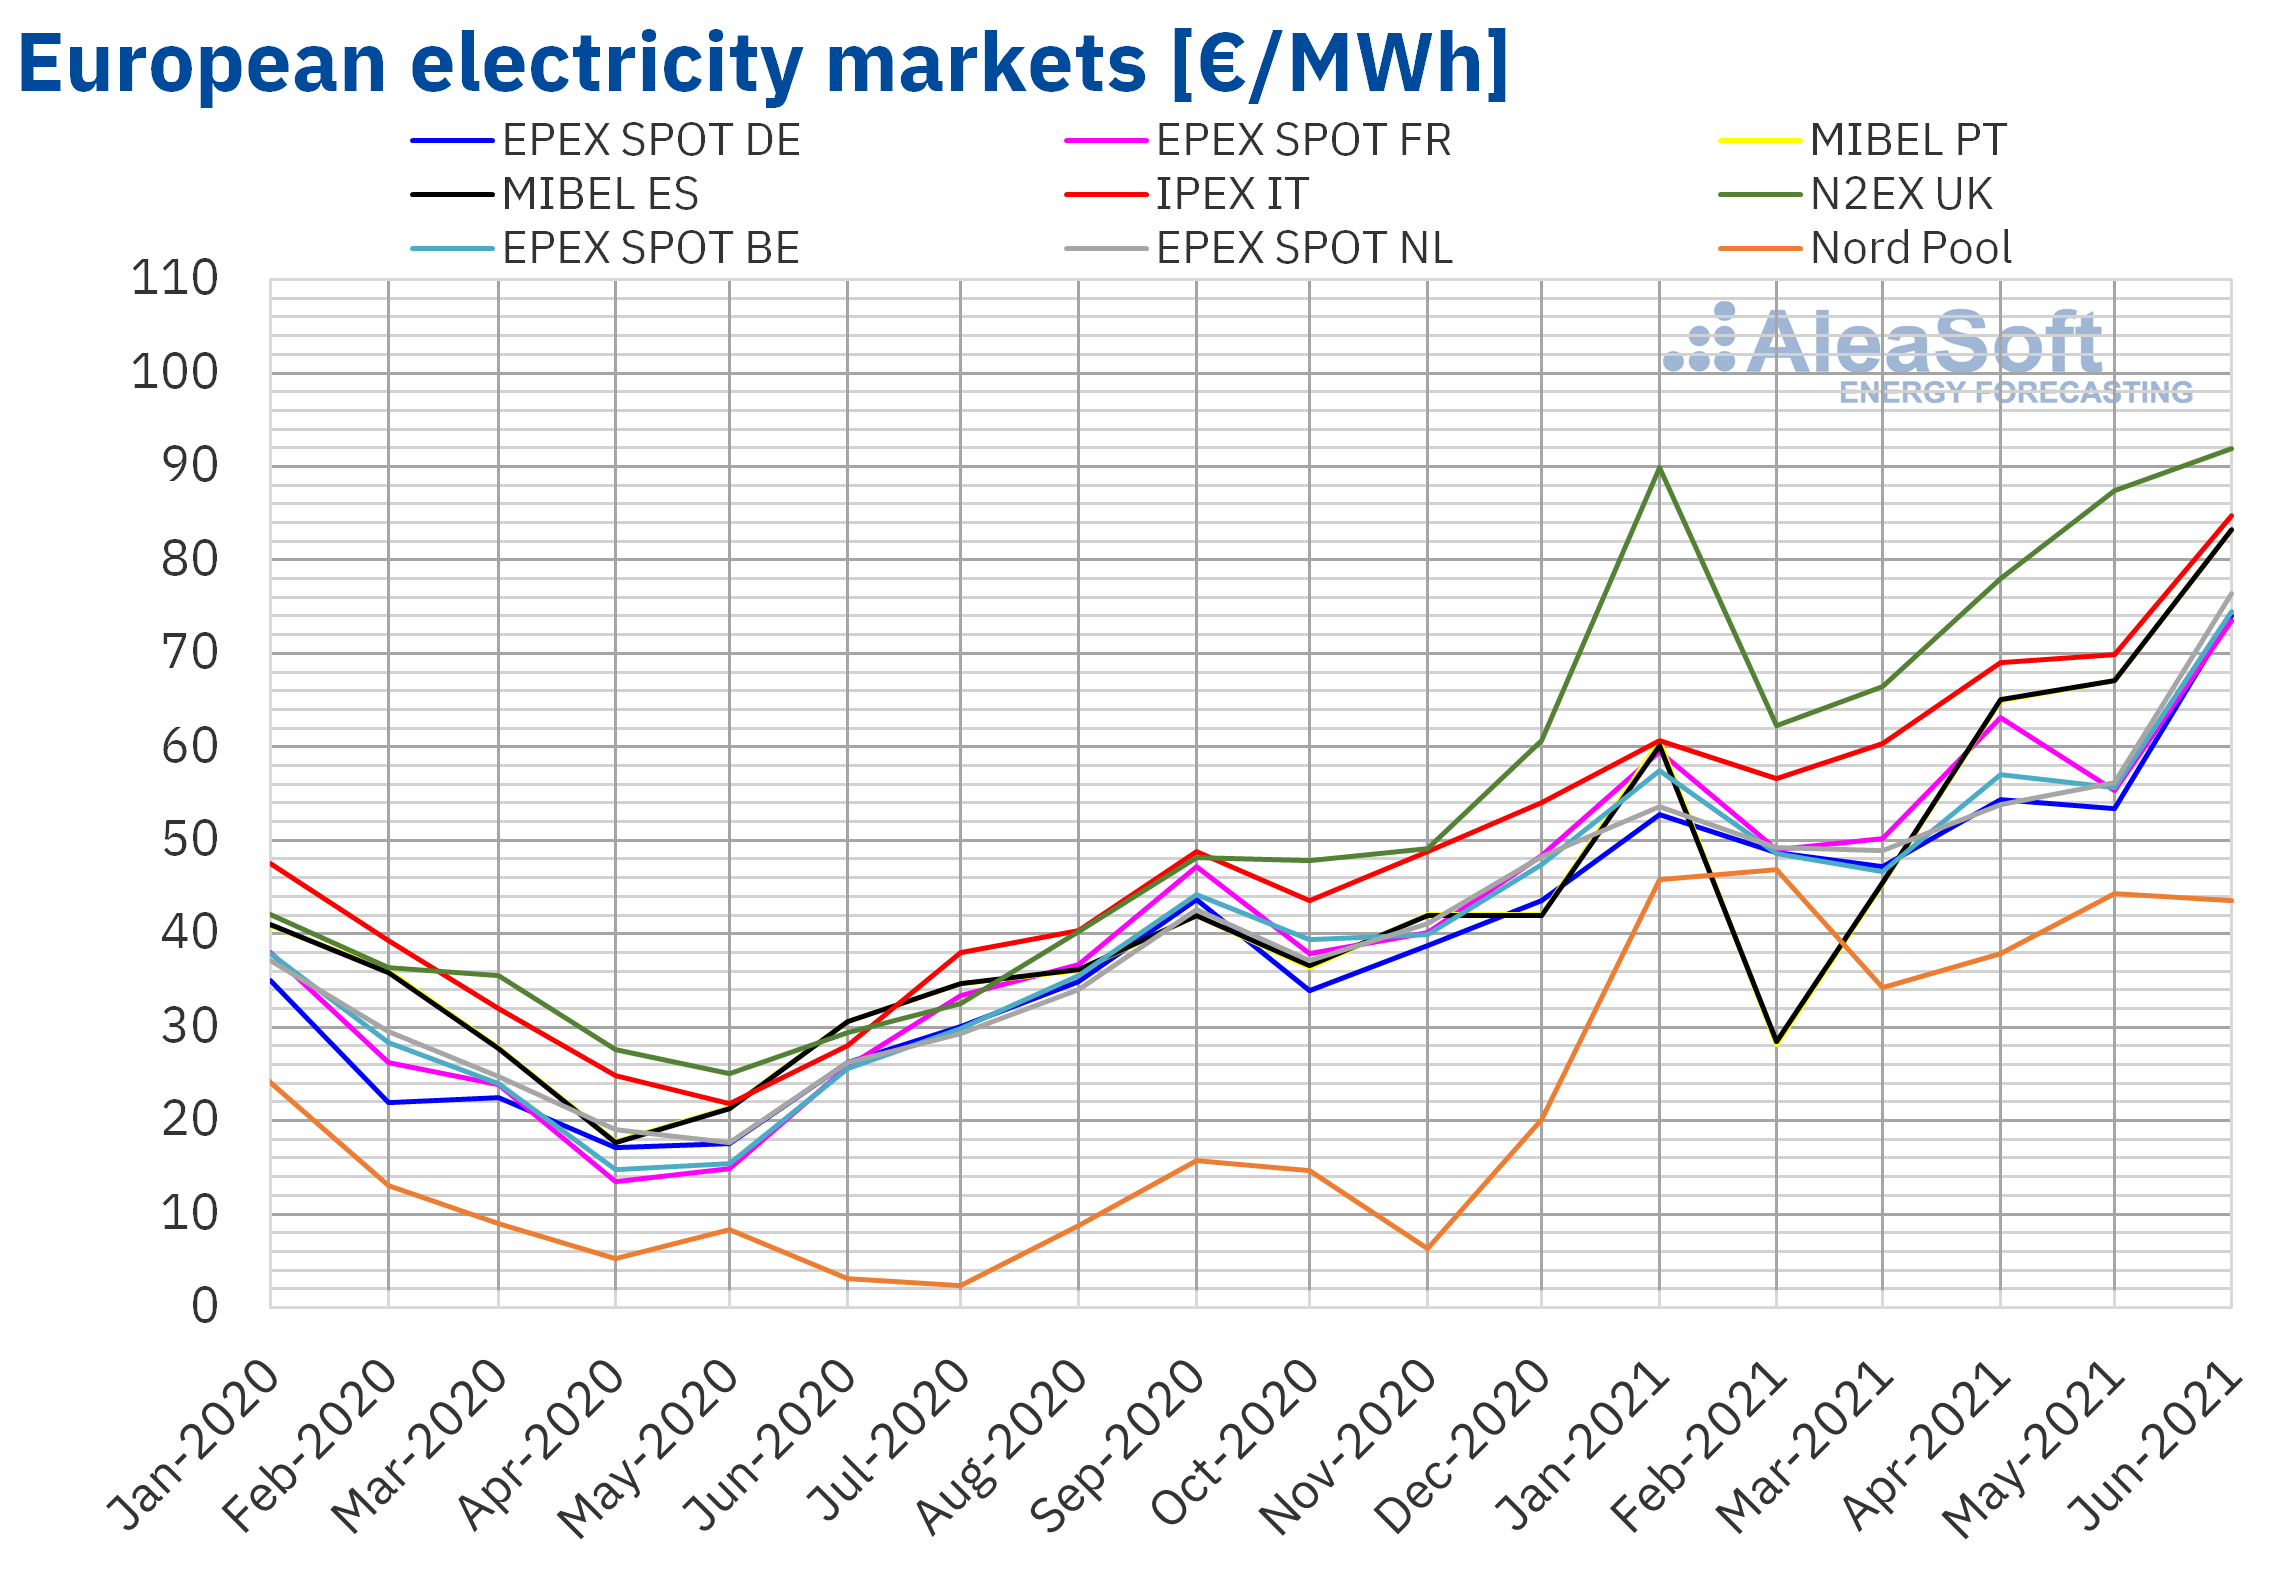 AleaSoft - Monthly electricity market prices Europe